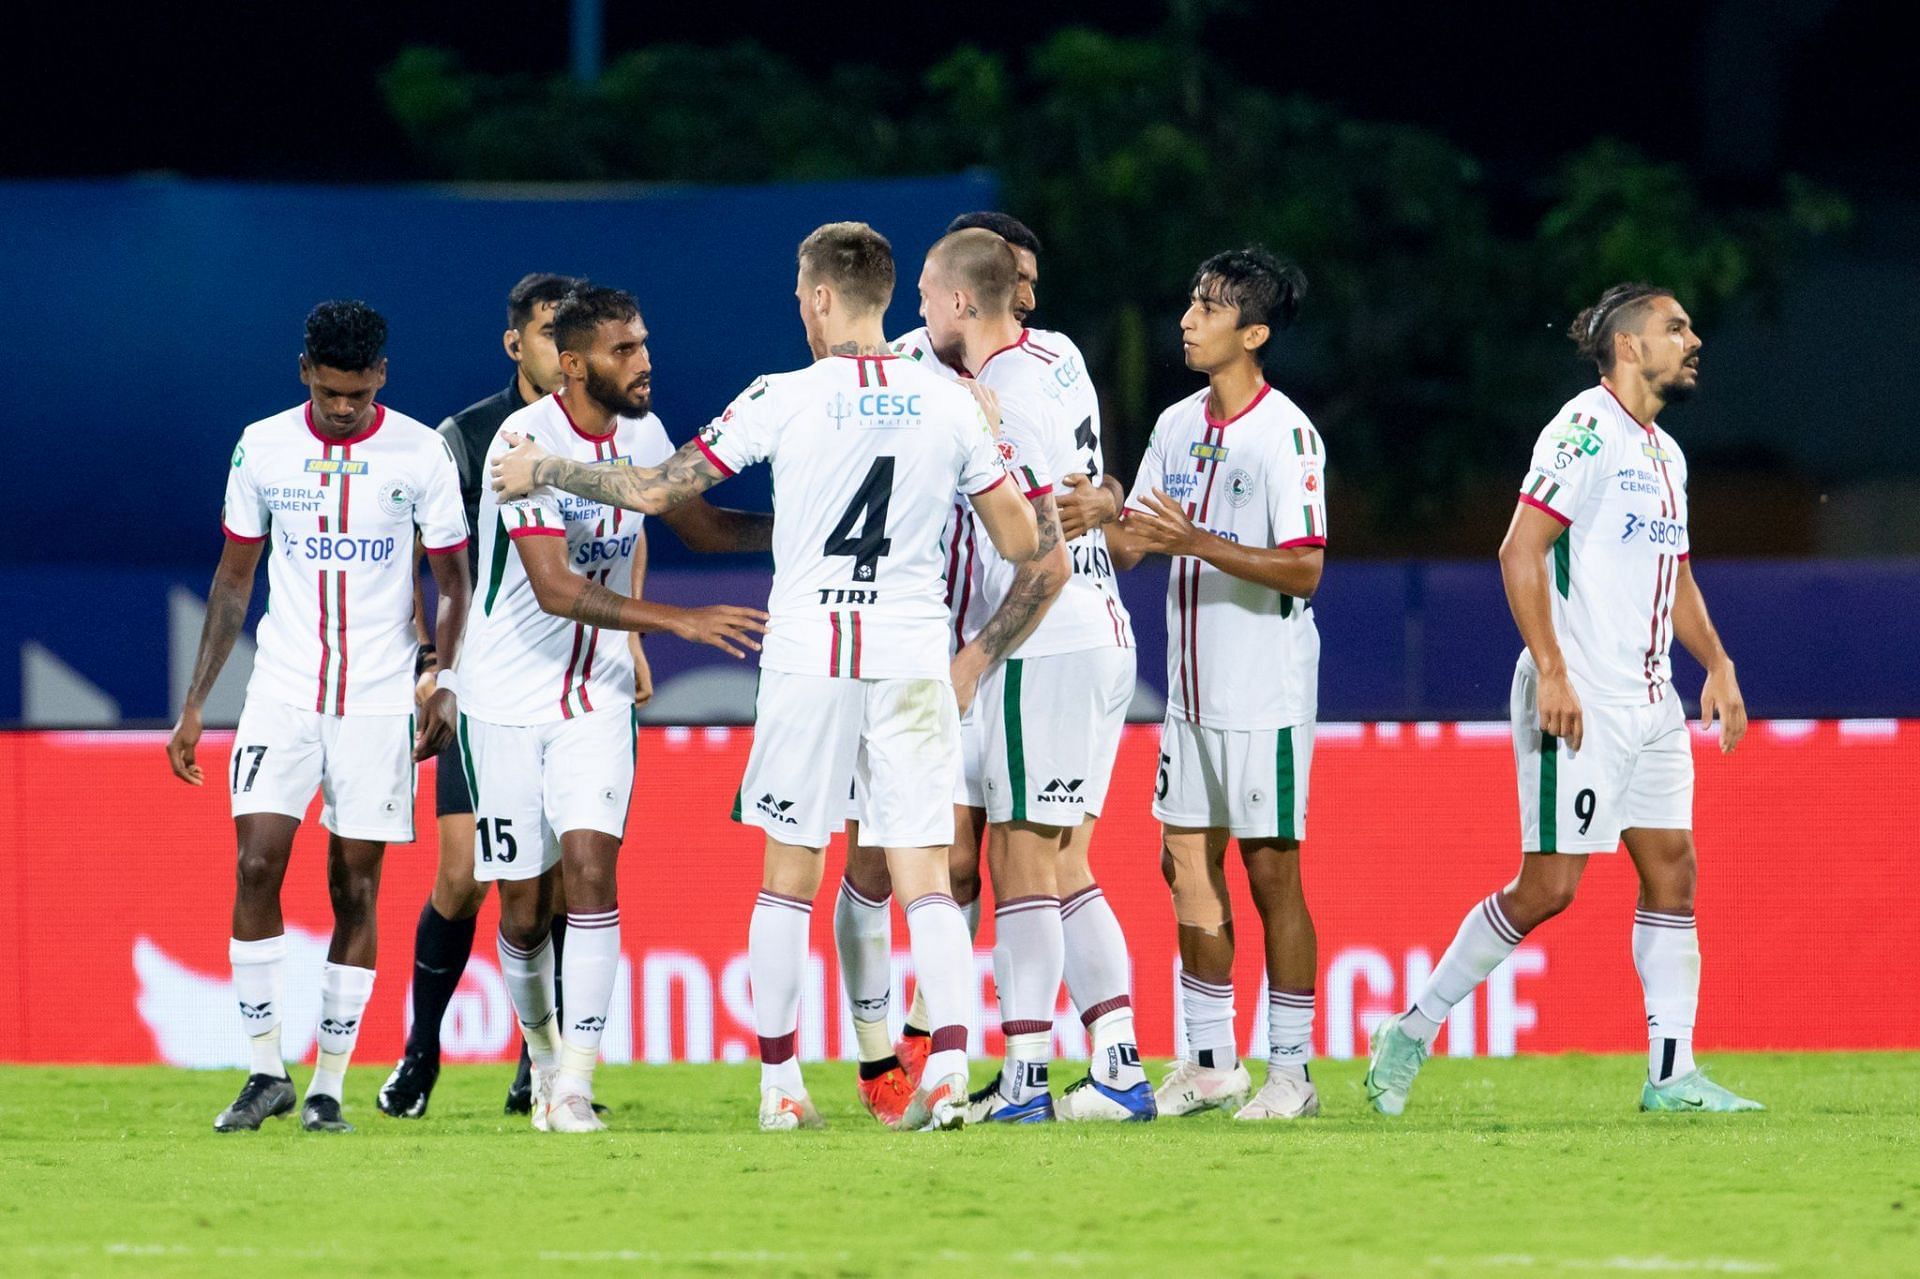 ATK Mohun Bagan players celebrating after their win against Hyderabad FC. (Image Courtesy: ISL Media)